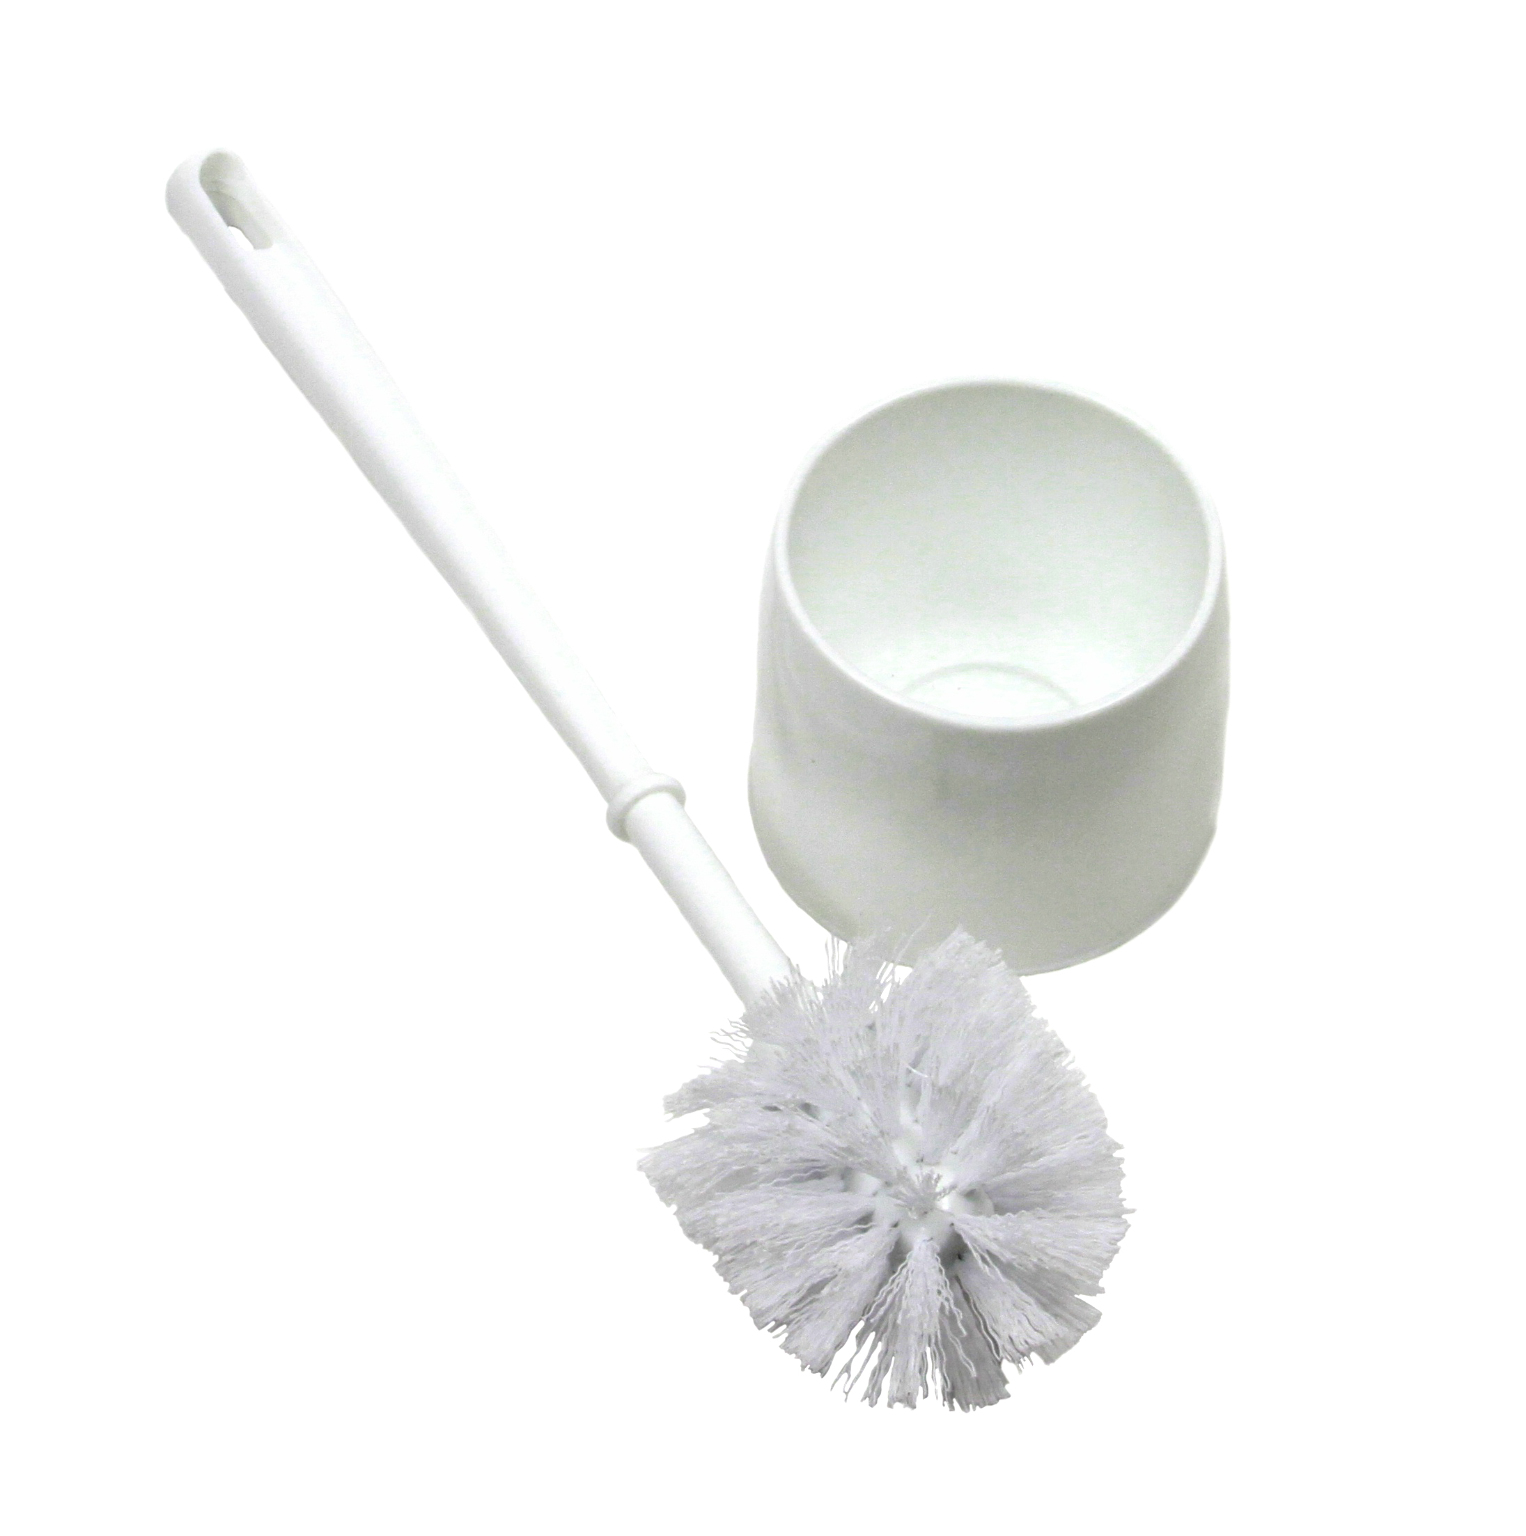 Buy Wholesale China Toilet Cleaner Set - Toilet Plunger With Bowl